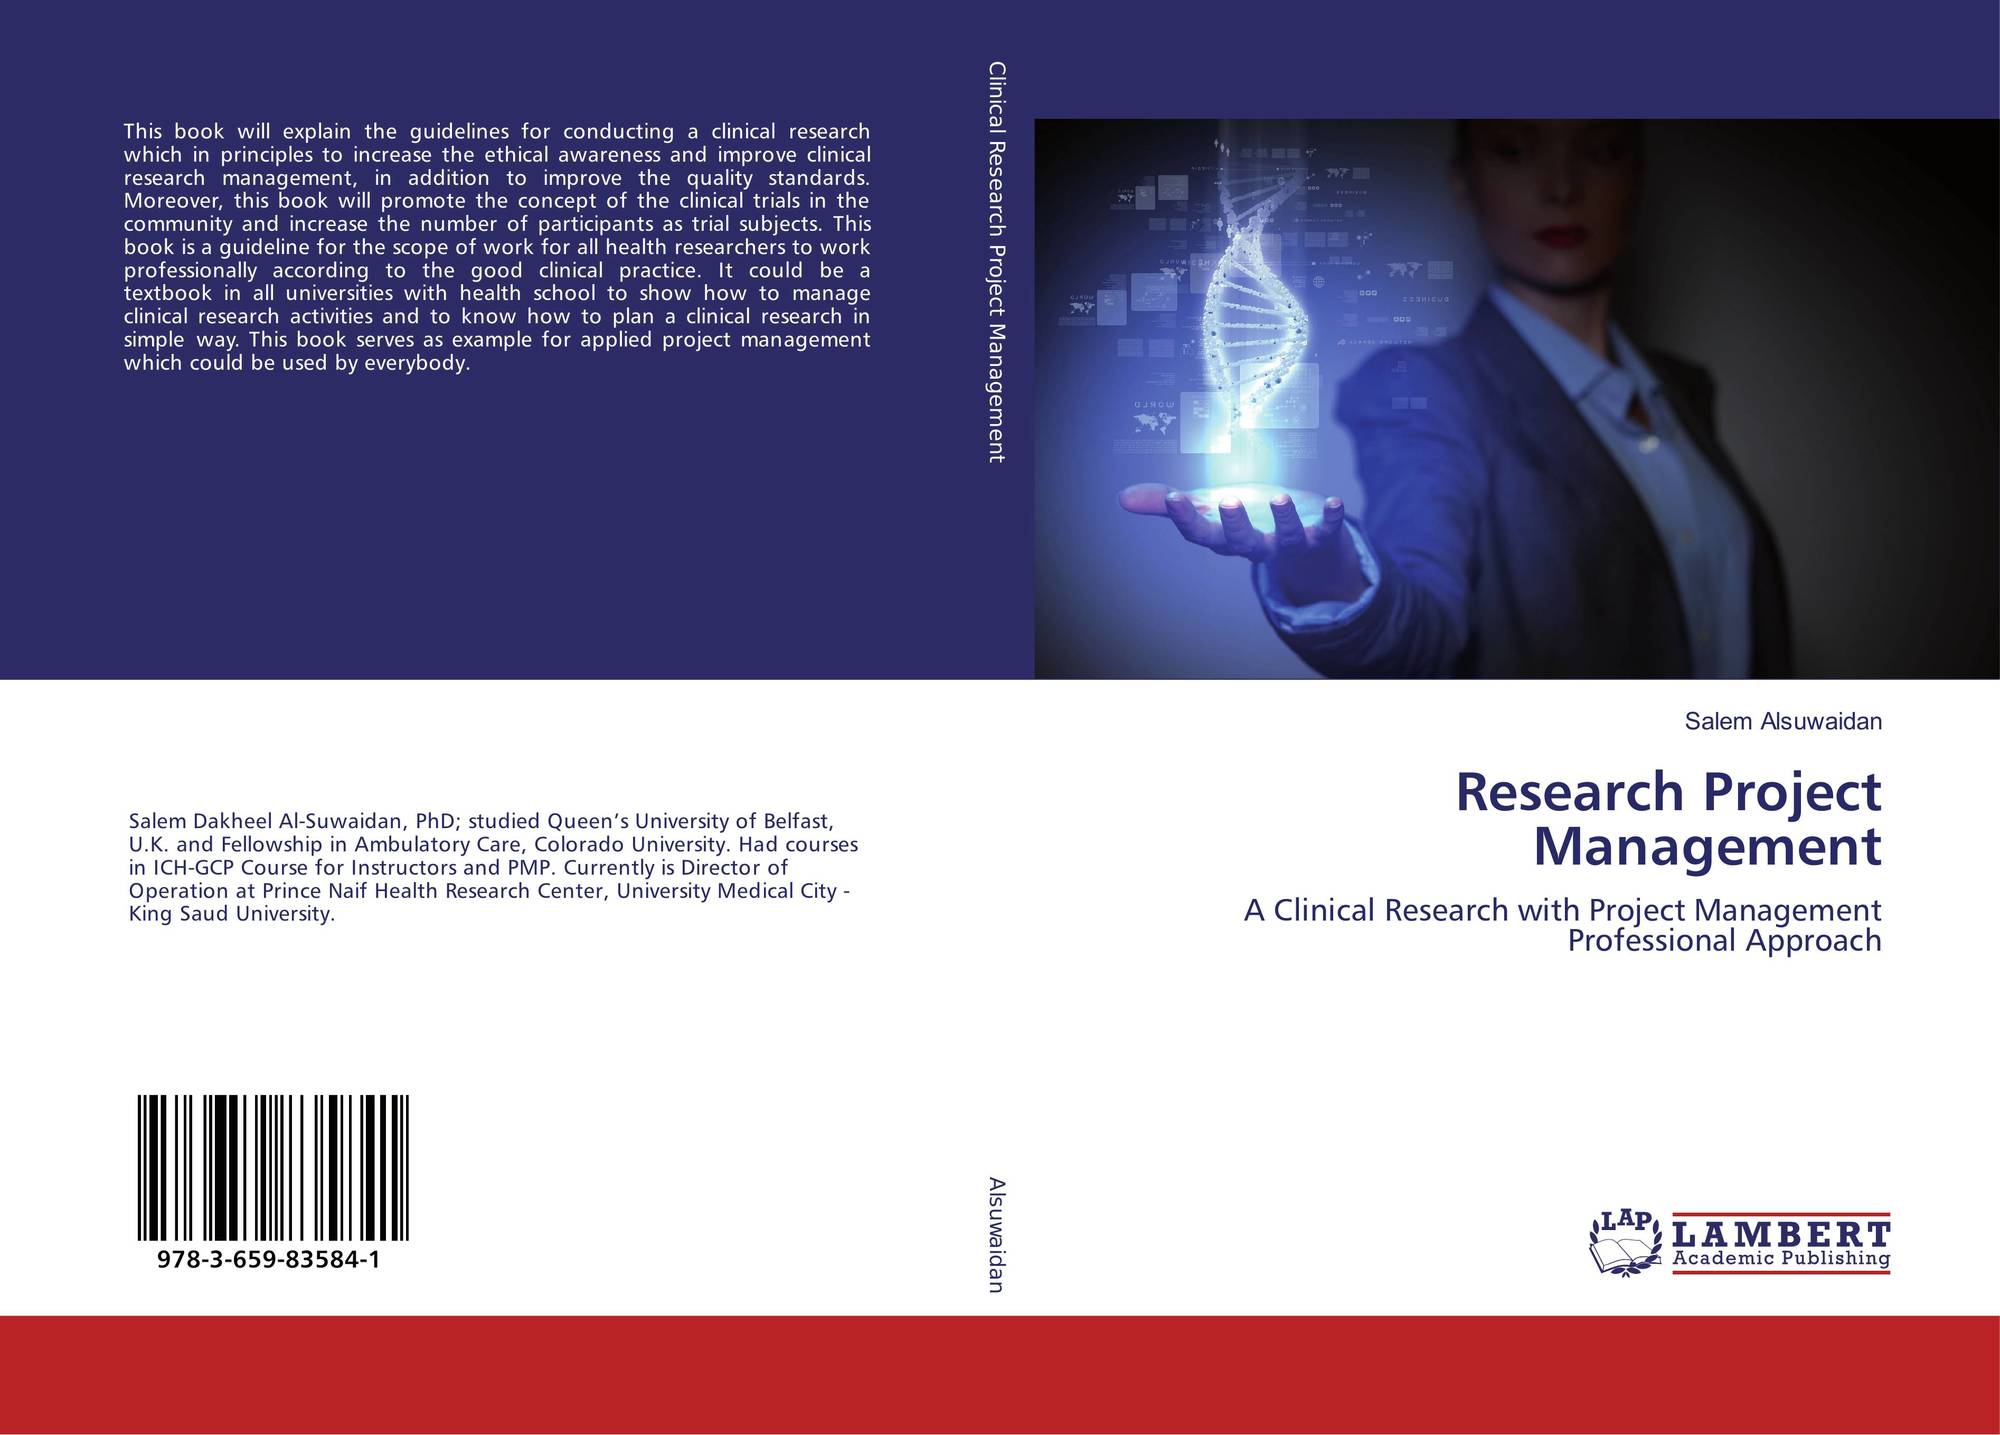 research of project management